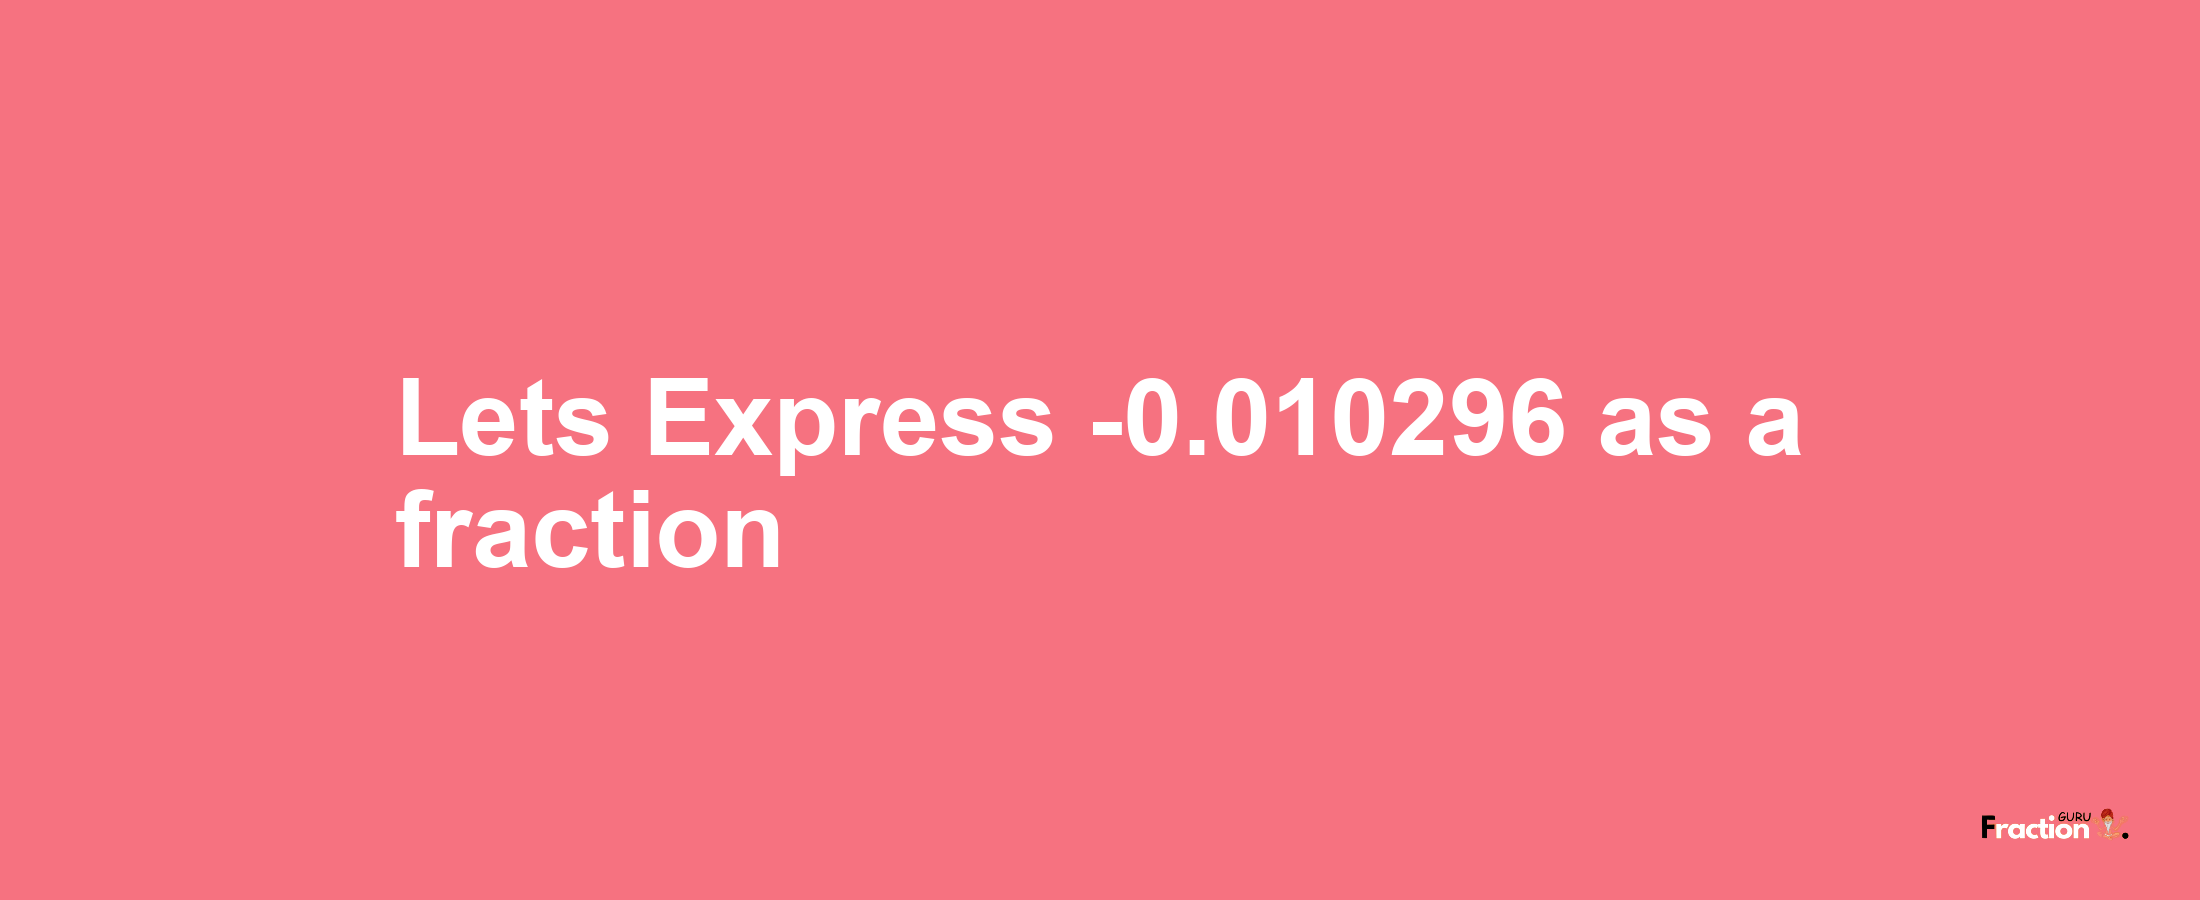 Lets Express -0.010296 as afraction